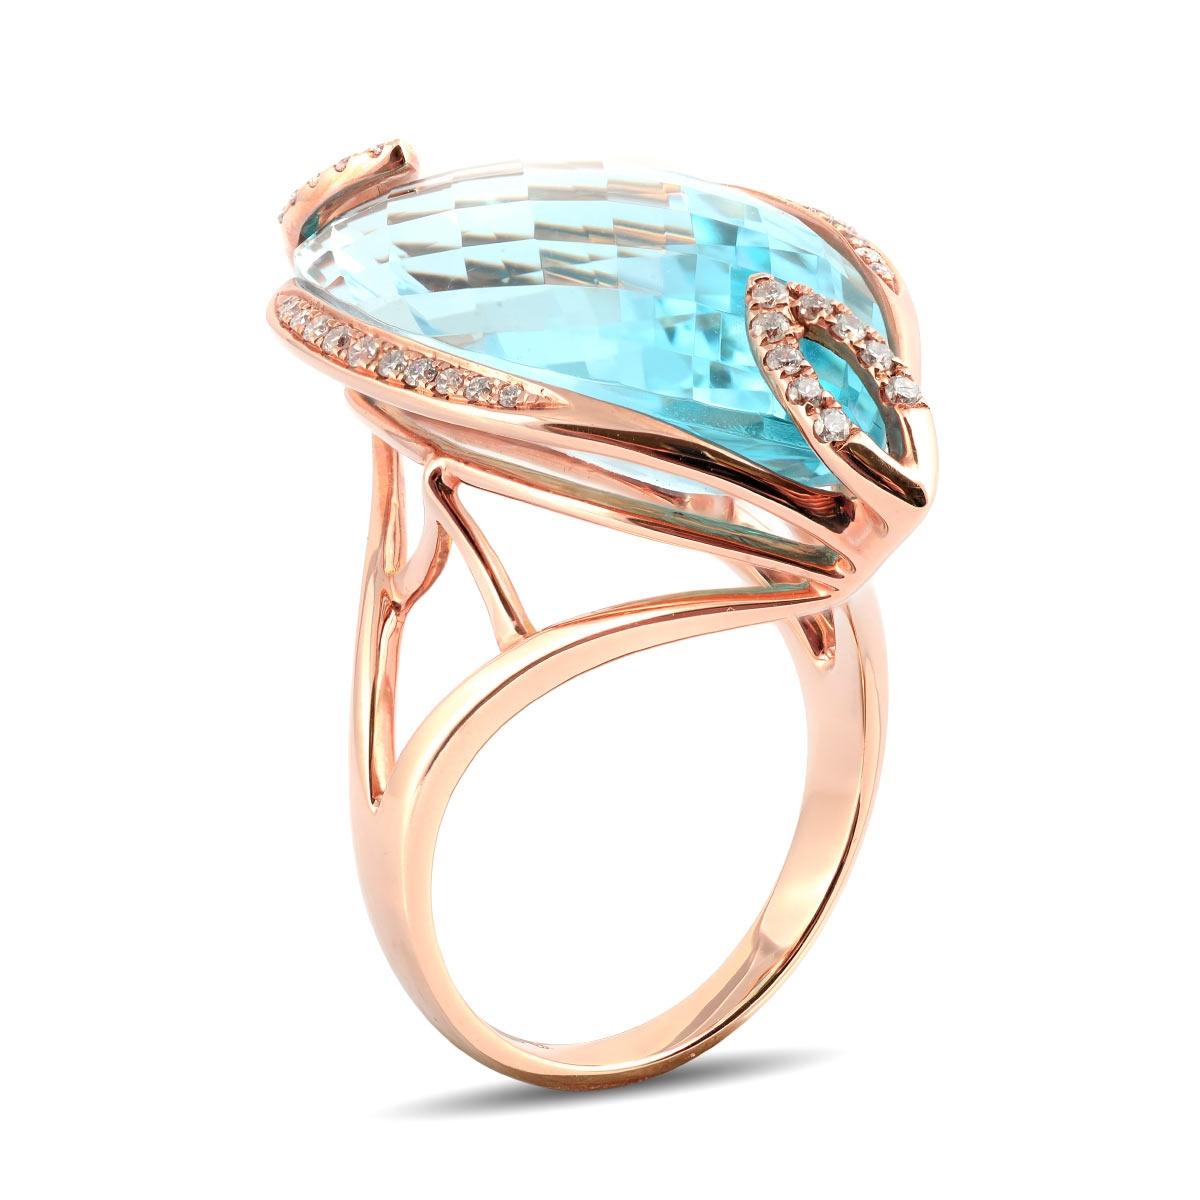 Embracing a radiant sky-blue hue, this marquise-shaped Blue Topaz ring is a charming choice. The gem's cut allows light to create a scintillating display, showcasing its ethereal beauty. Set in rose gold, it finds the perfect complement, while the